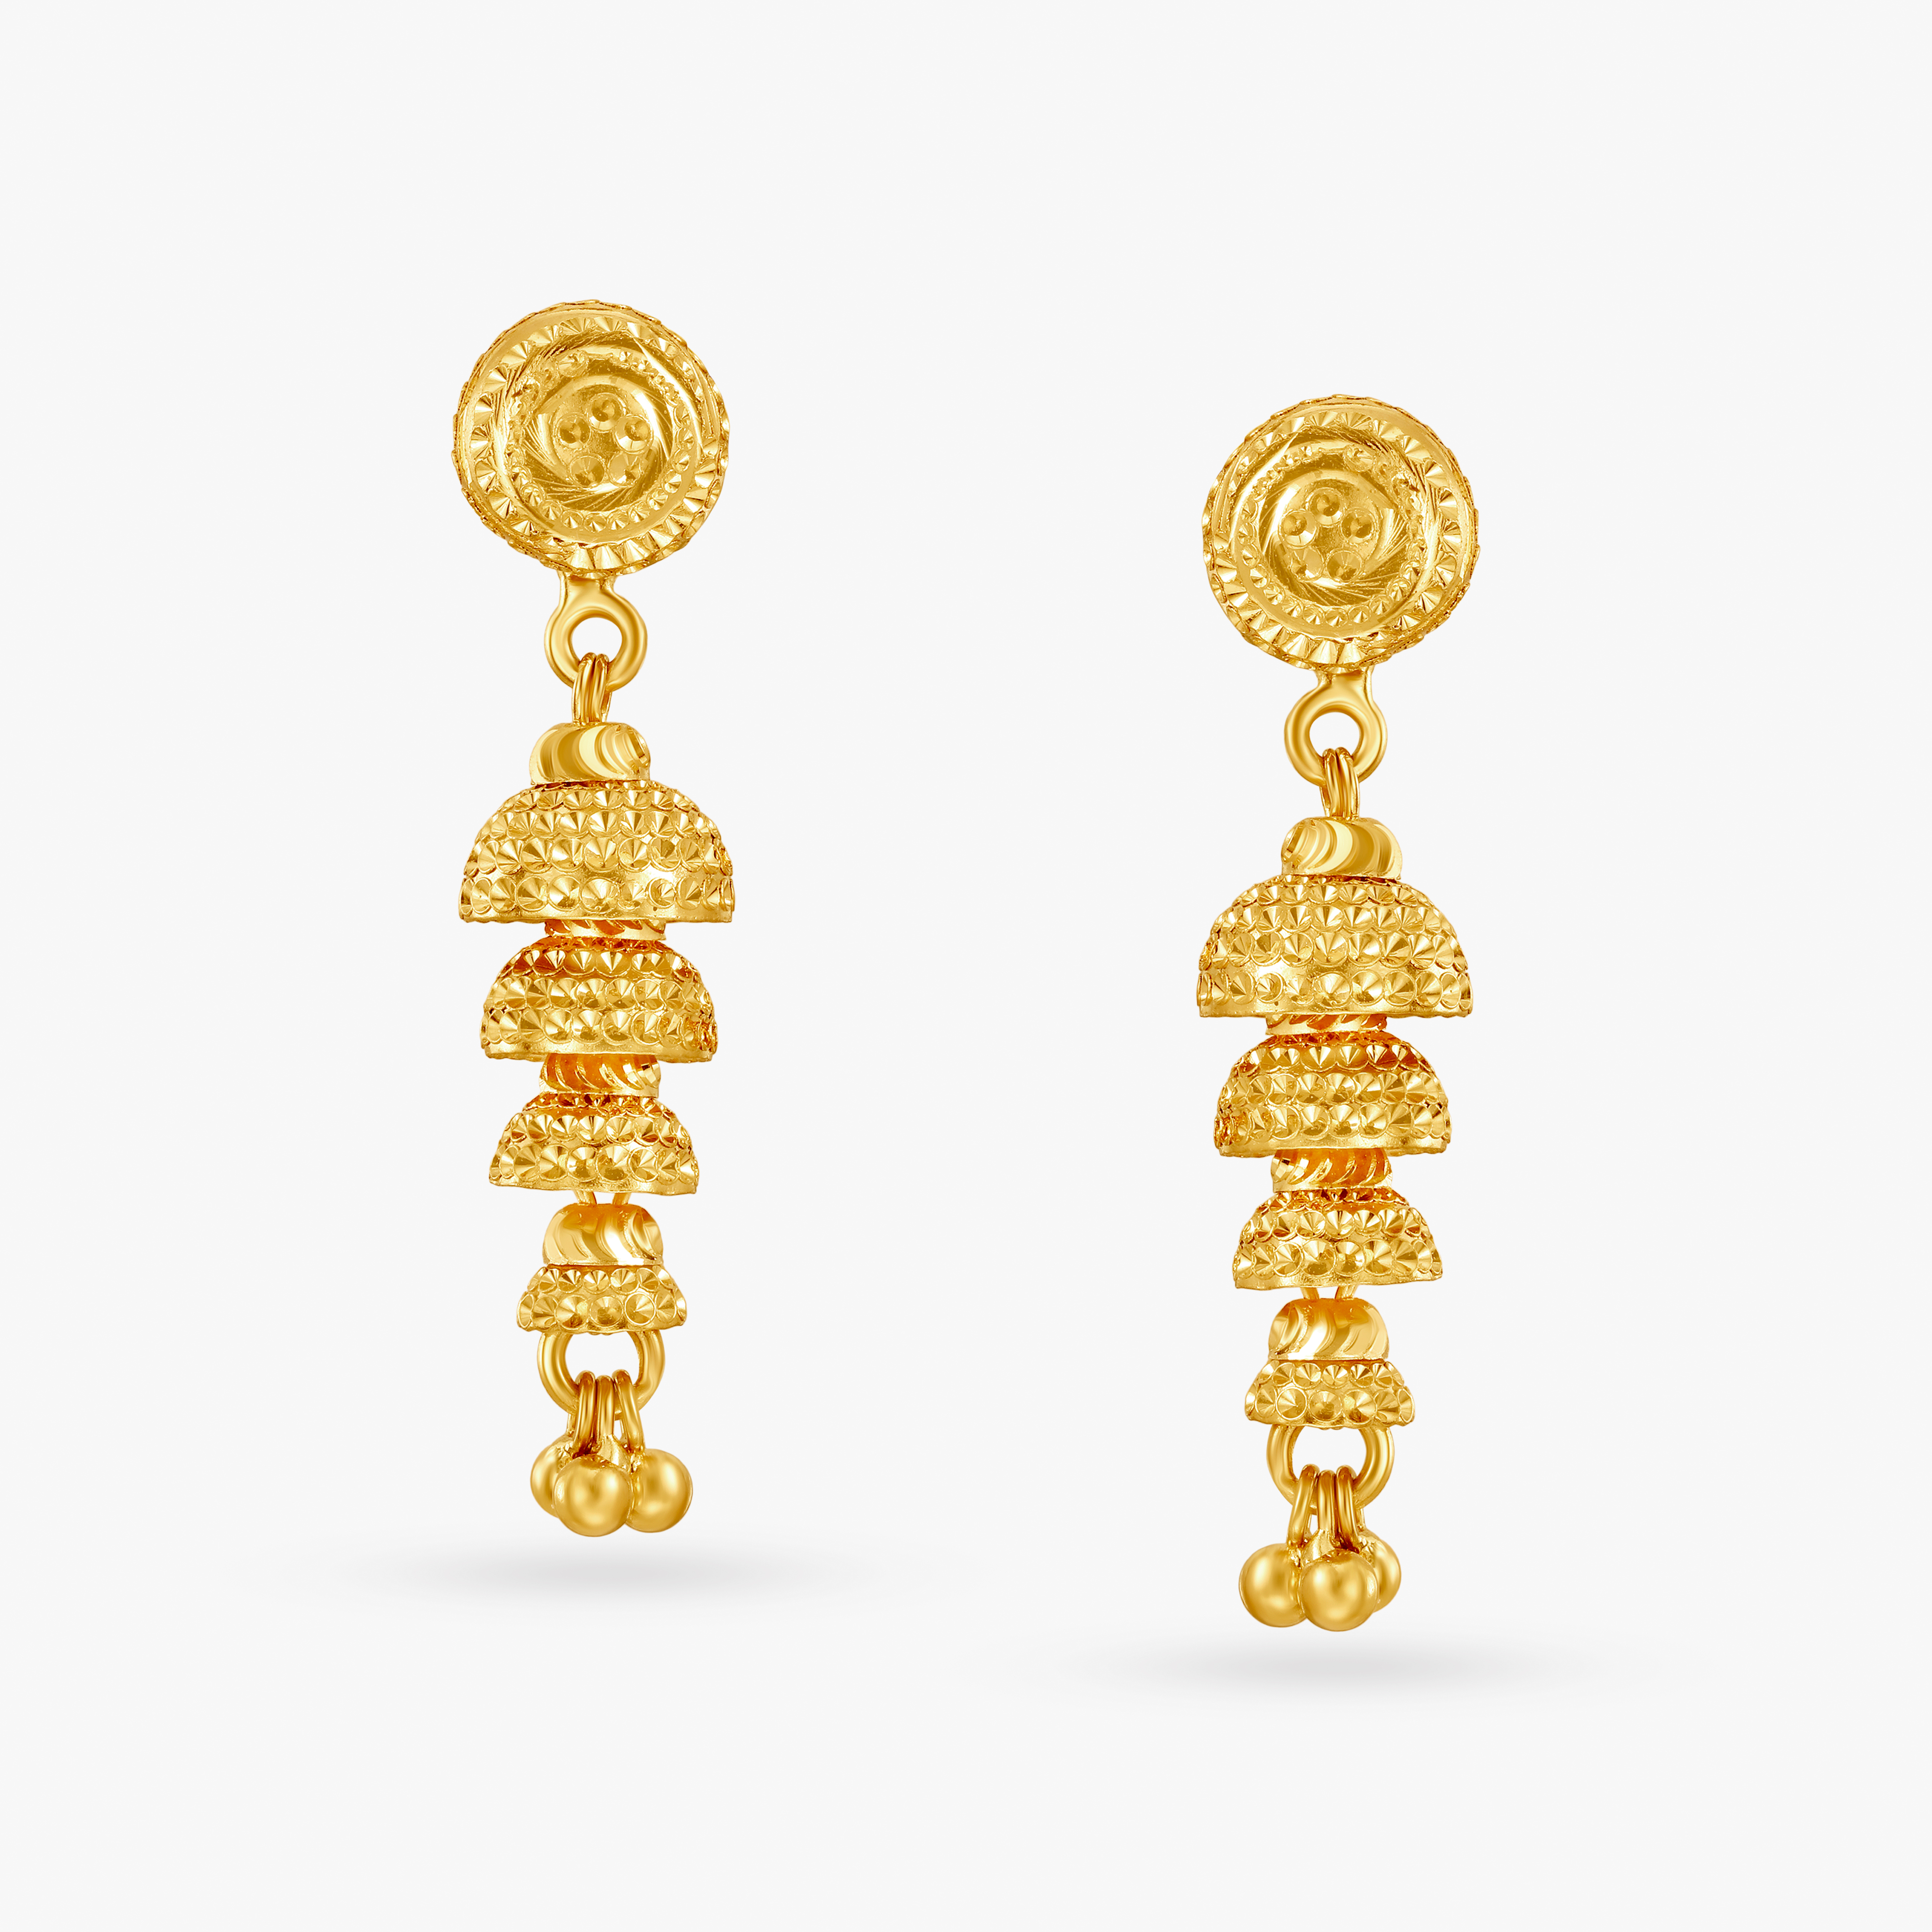 Buy Latest Gold Earring Designs Online at the Best Price for Women